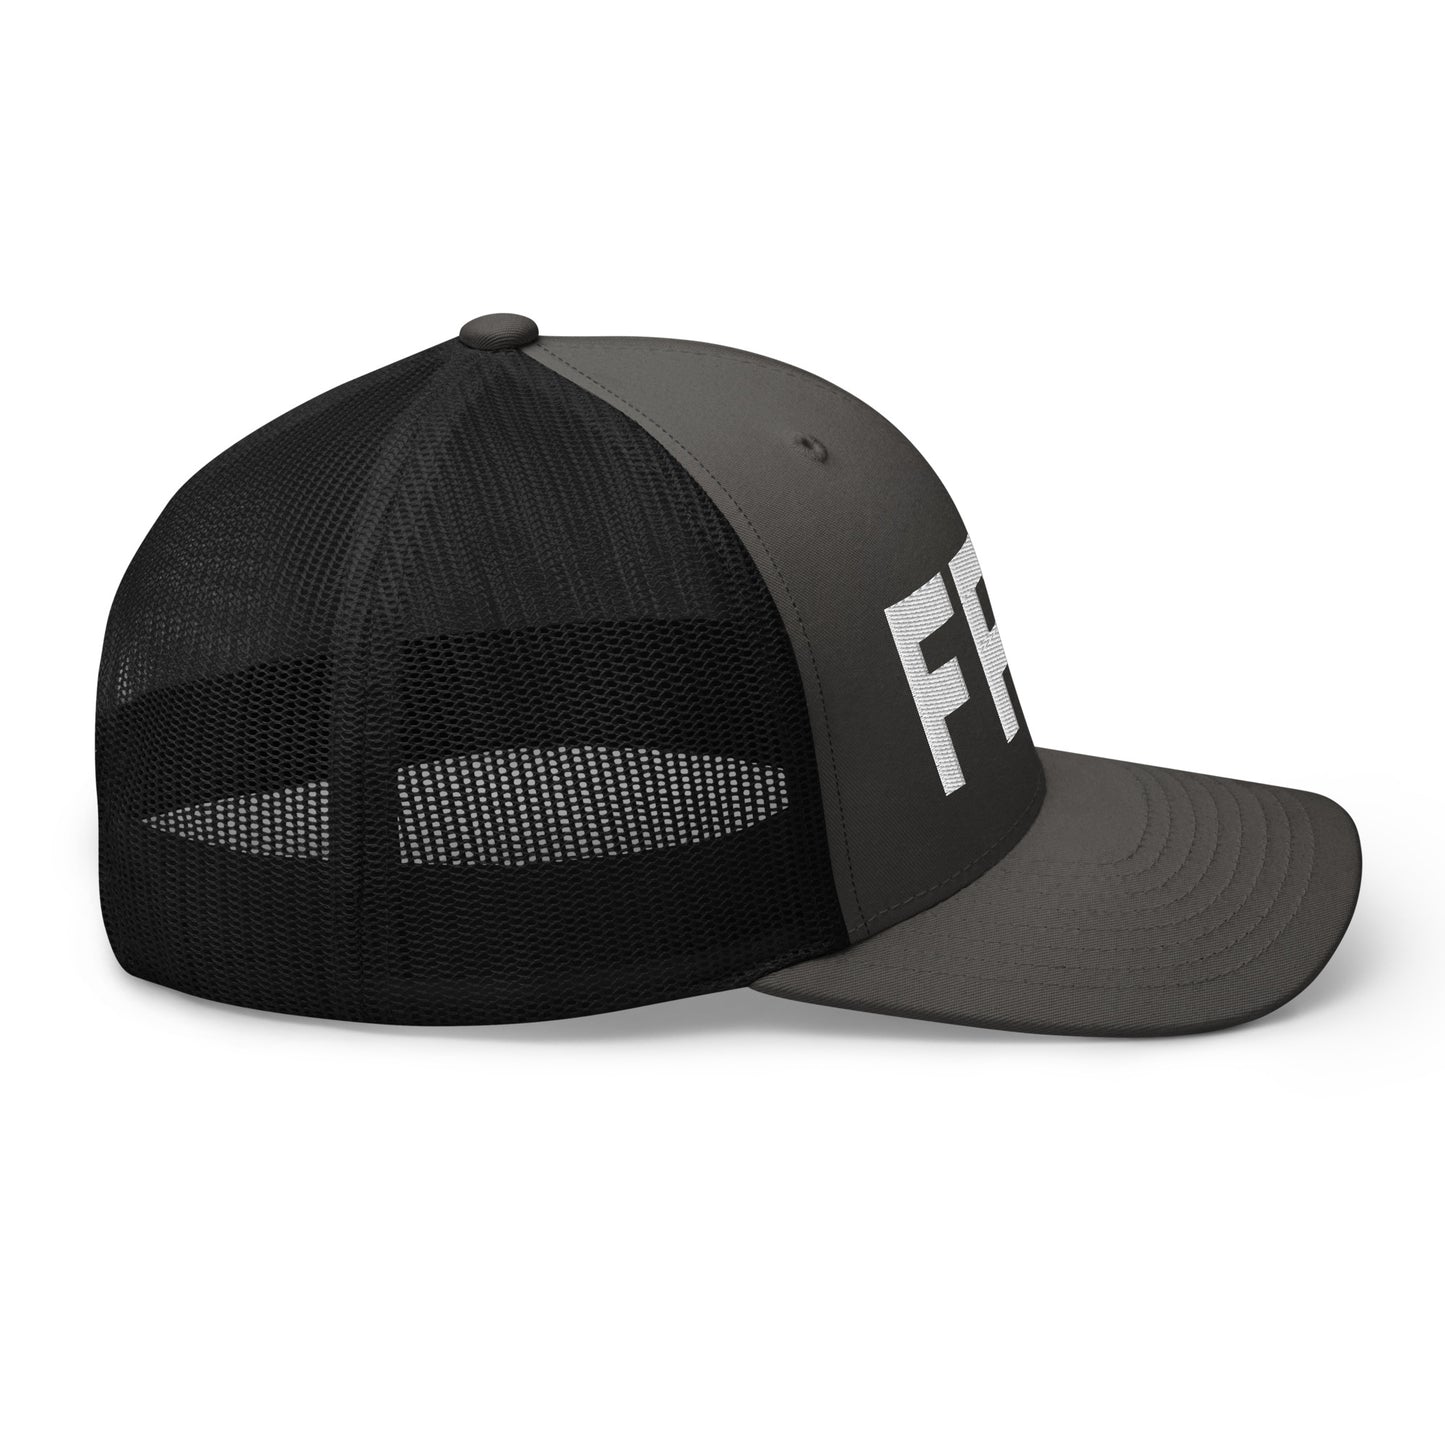 FPO Embroidered Trucker Cap